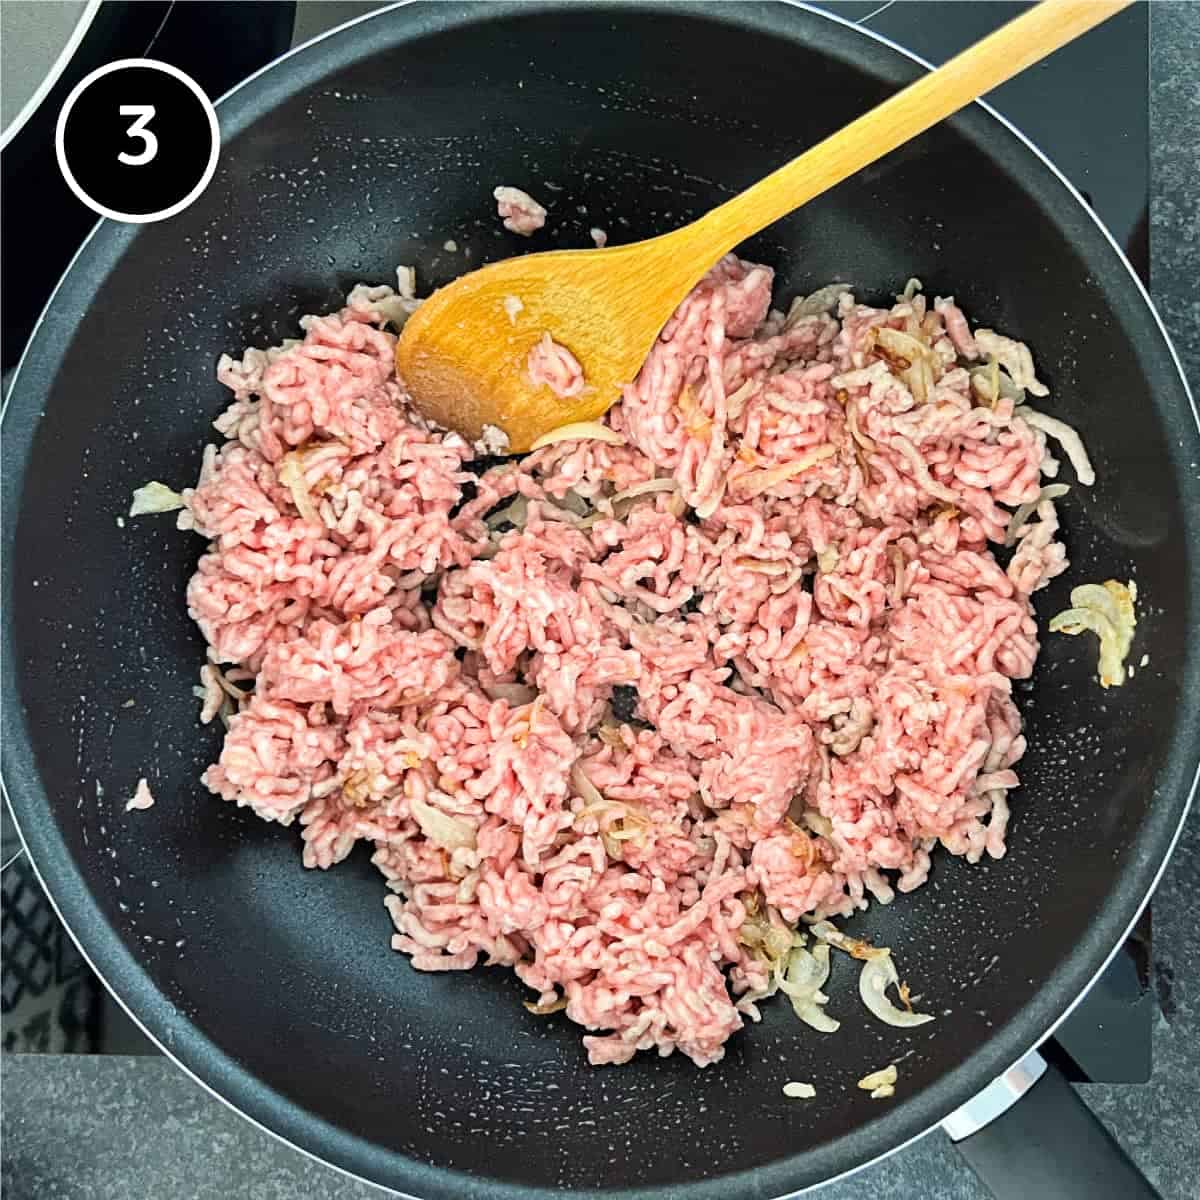 Pork and onion frying in a wok